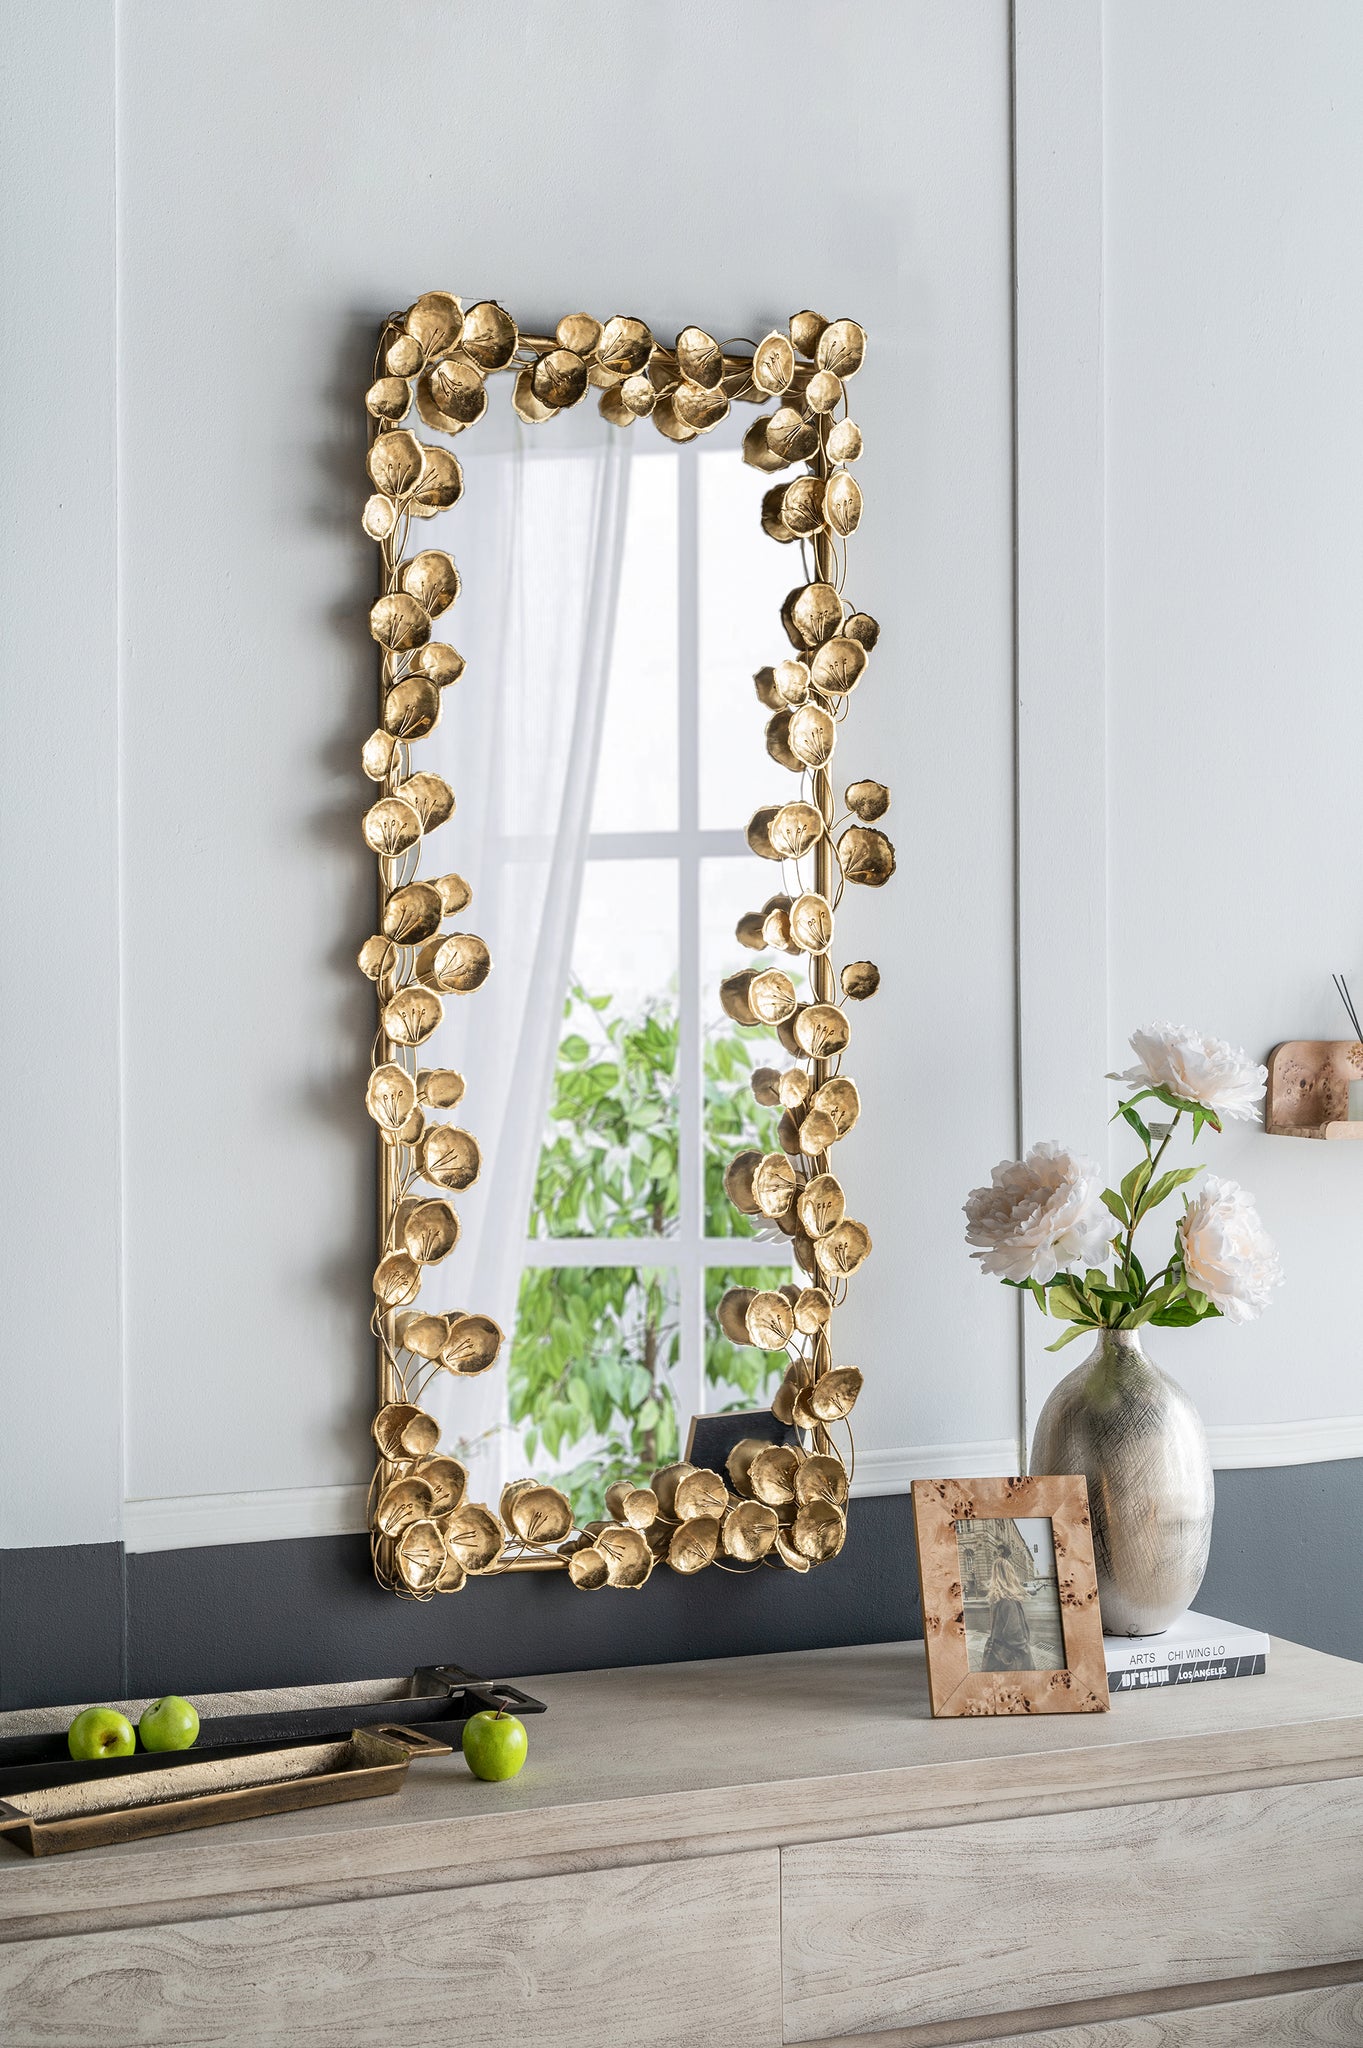 61" x 31" Full Length Mirror with Golden Leaf Accents gold-iron